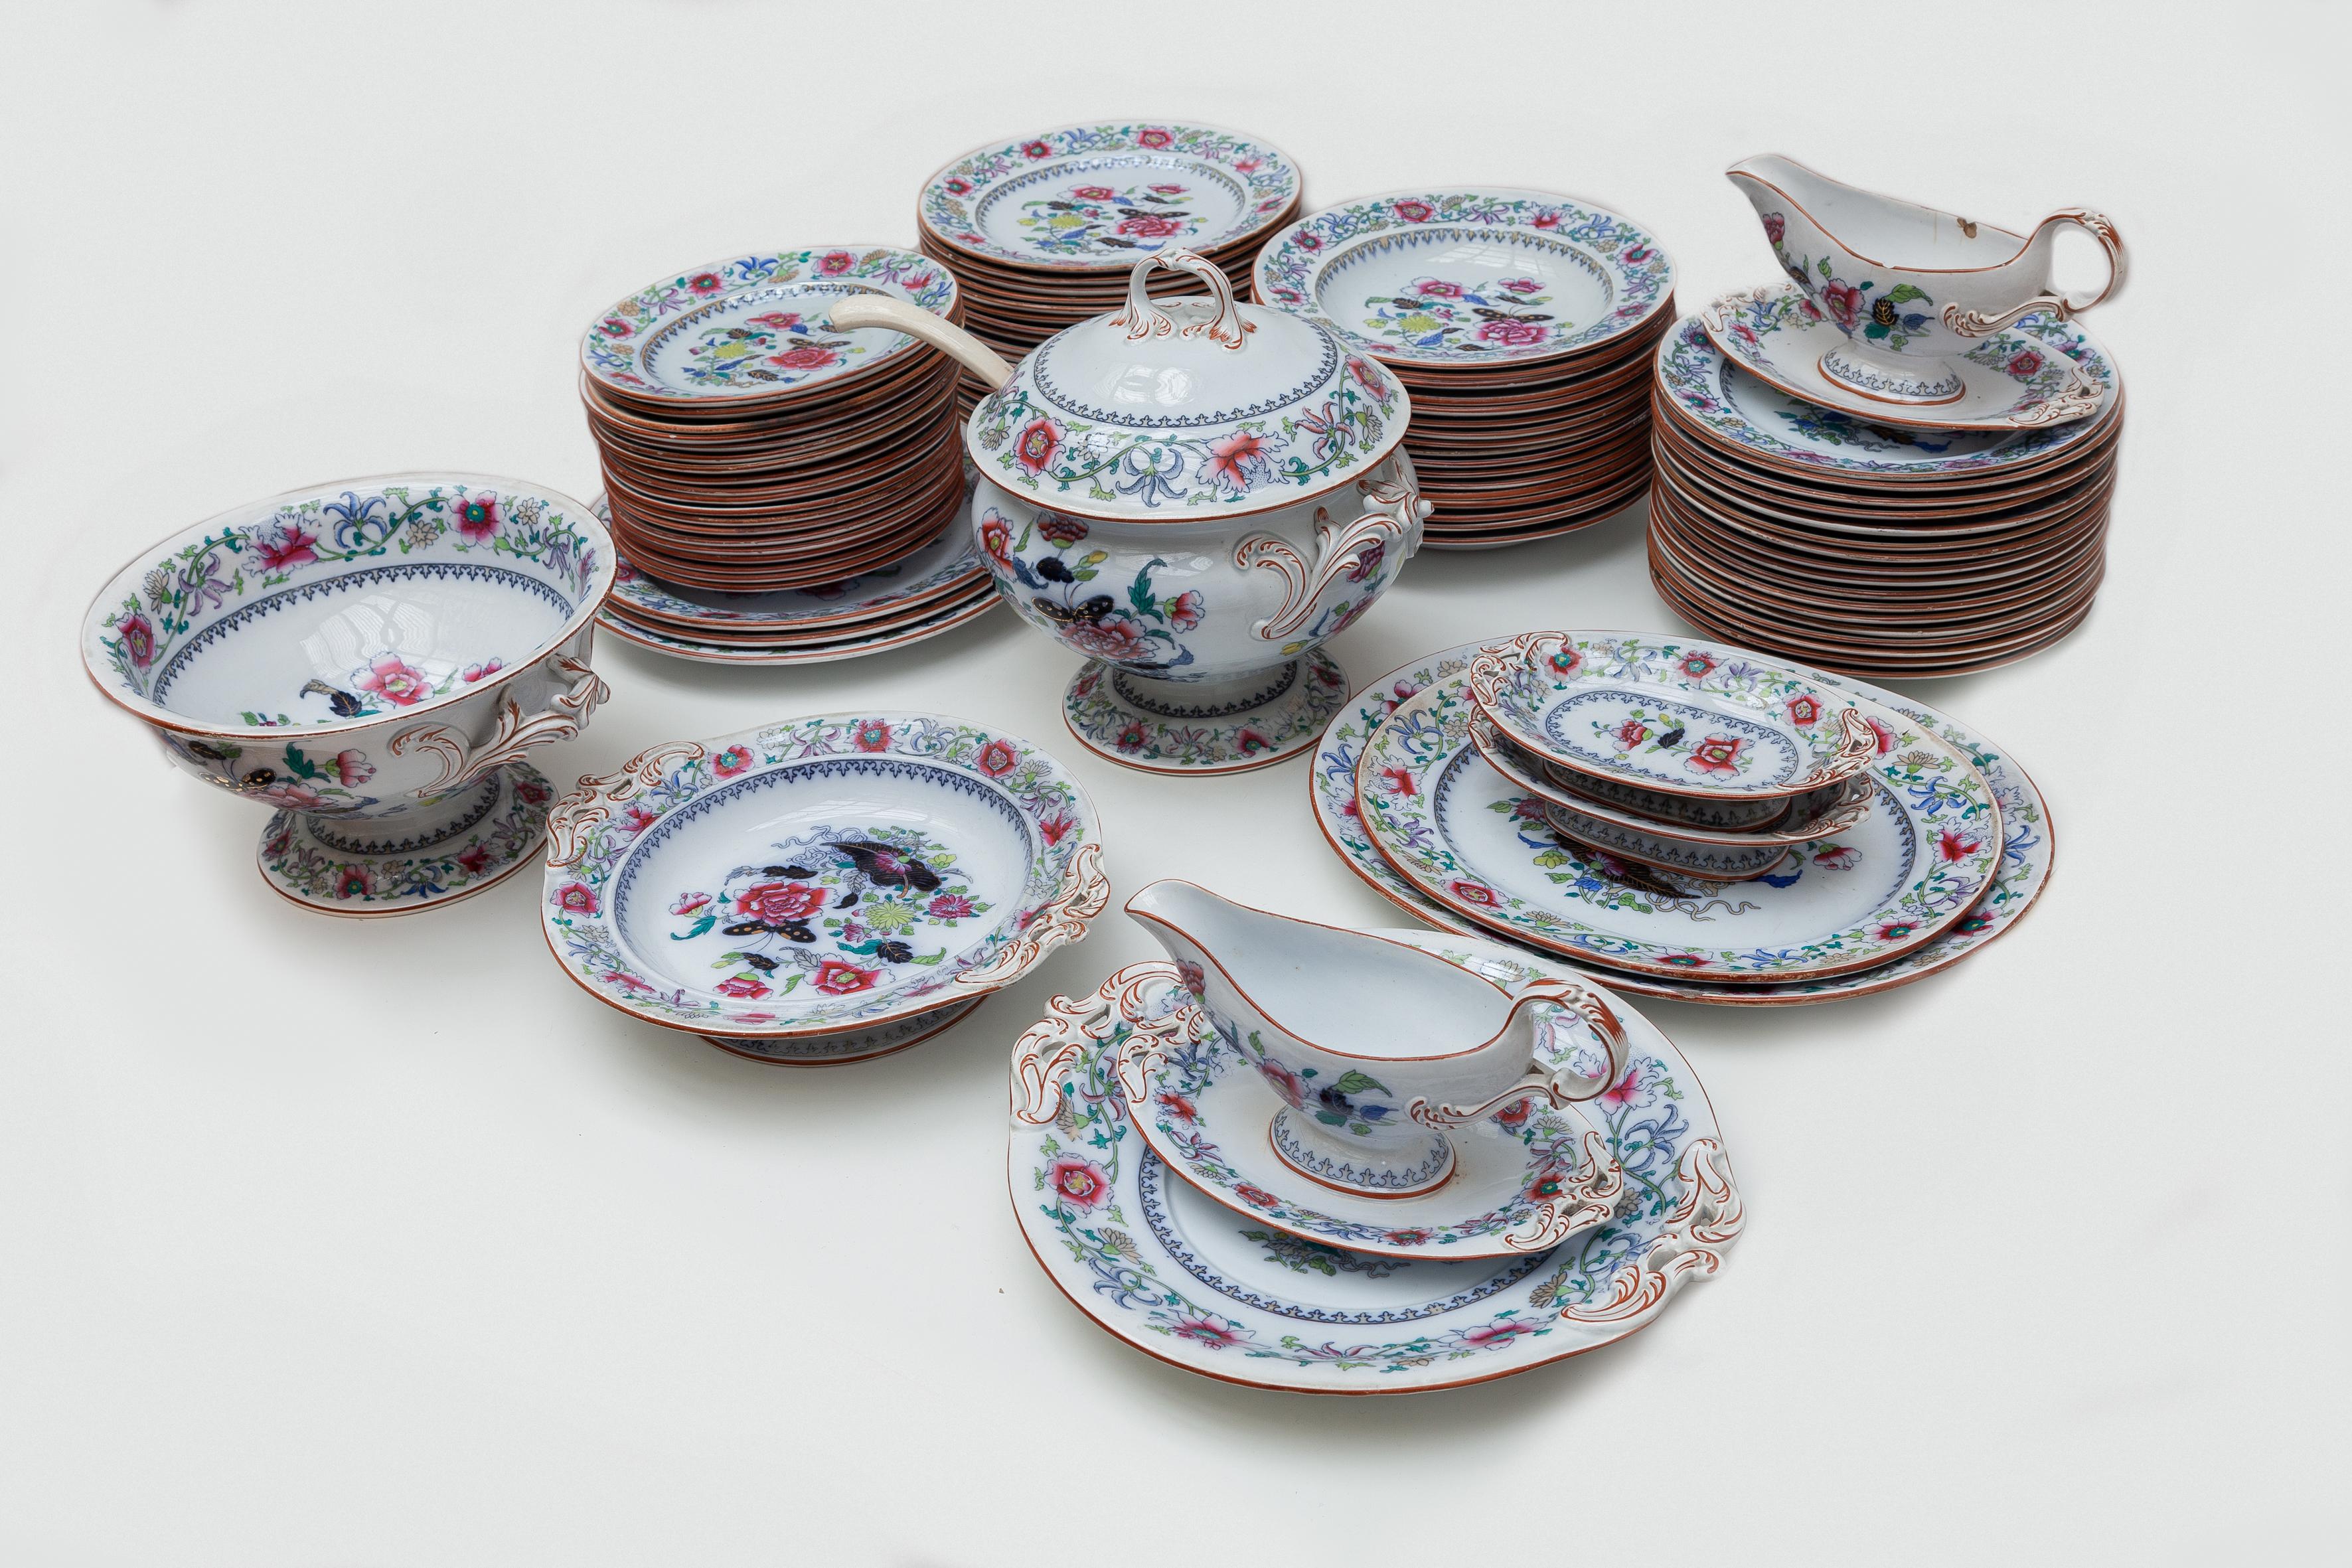 Dinner service set beautiful bright floral and butterfly motif in fine earthenware by Boch Frères. Polychrome Chinese Familie Rose decoration, covered with a glossy varnish. These dinner set has survived for more than 150 years without being